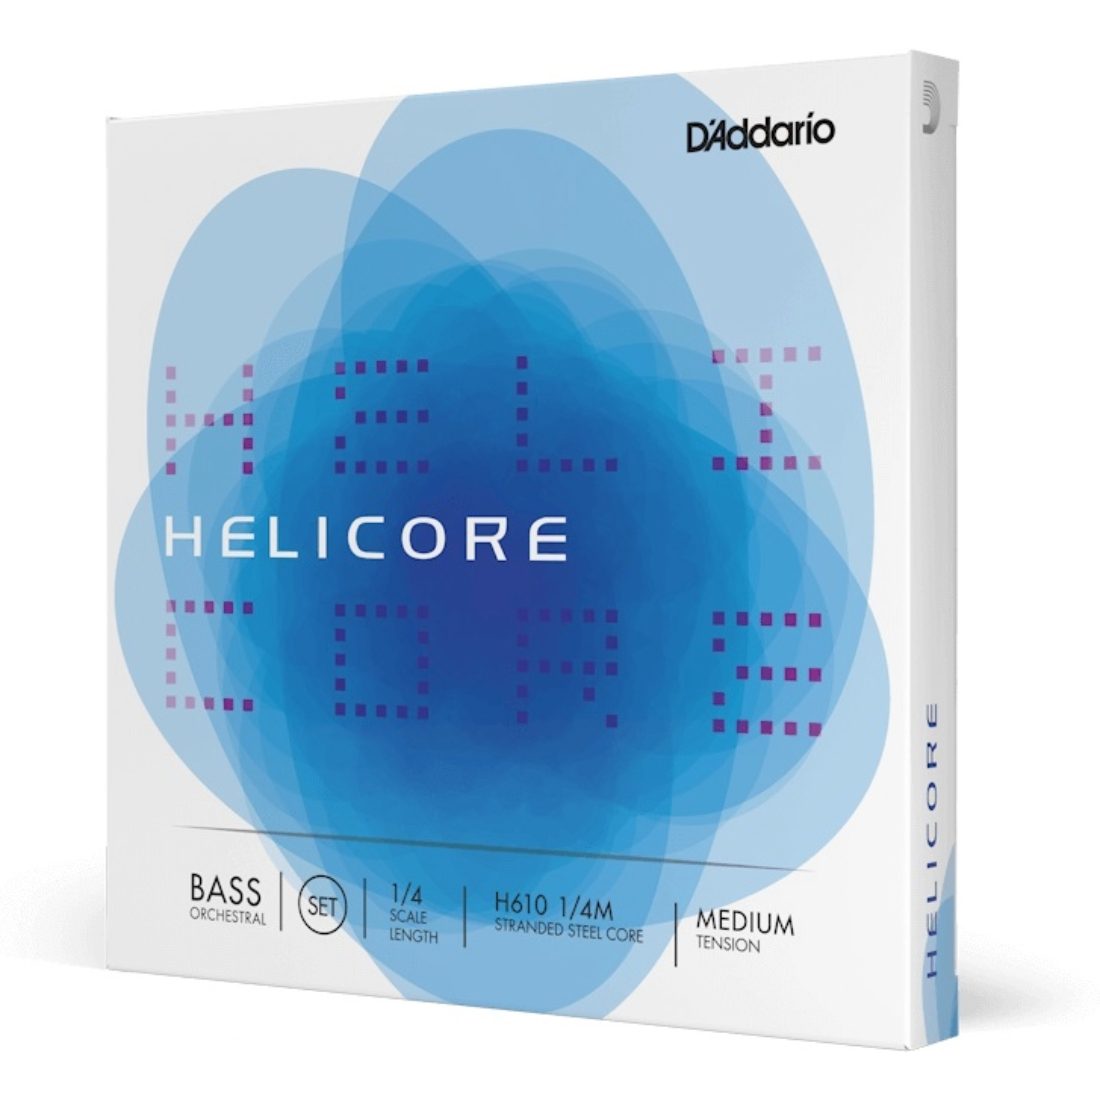 White and blue box of Helicore one fourth scale medium tension, full string set